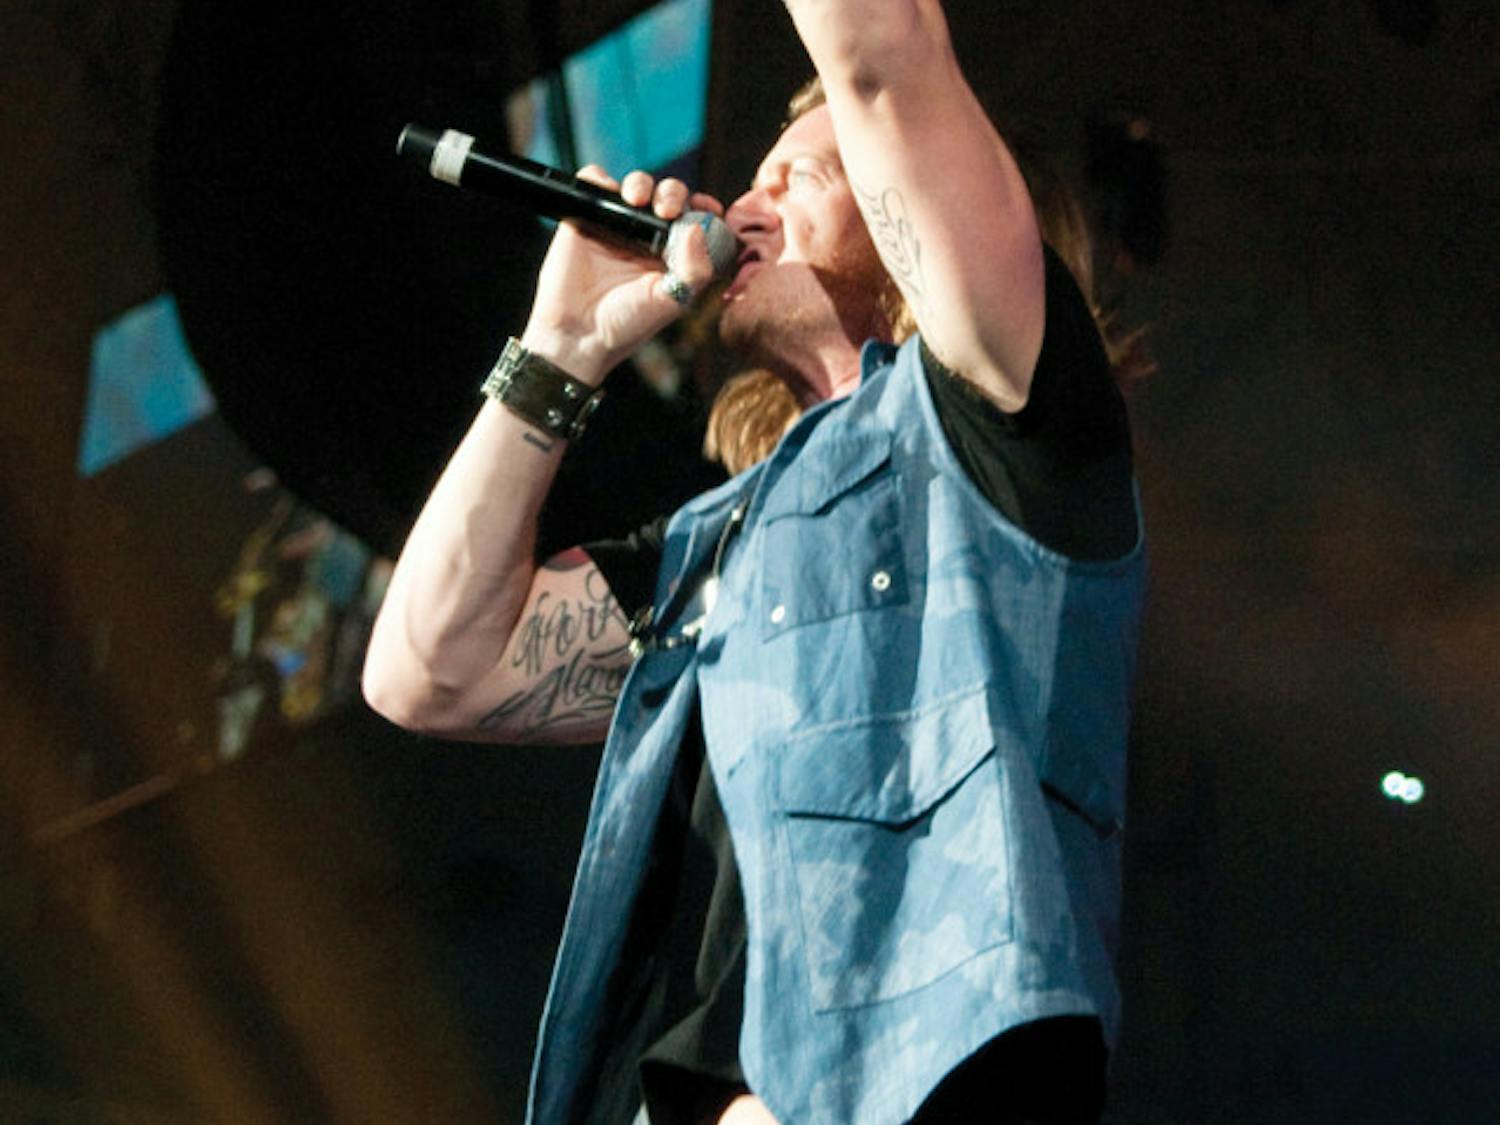 Tyler Hubbard, of Florida Georgia Line, performs at the O’Connell Center in 2013 as part of a Student Government Productions show.